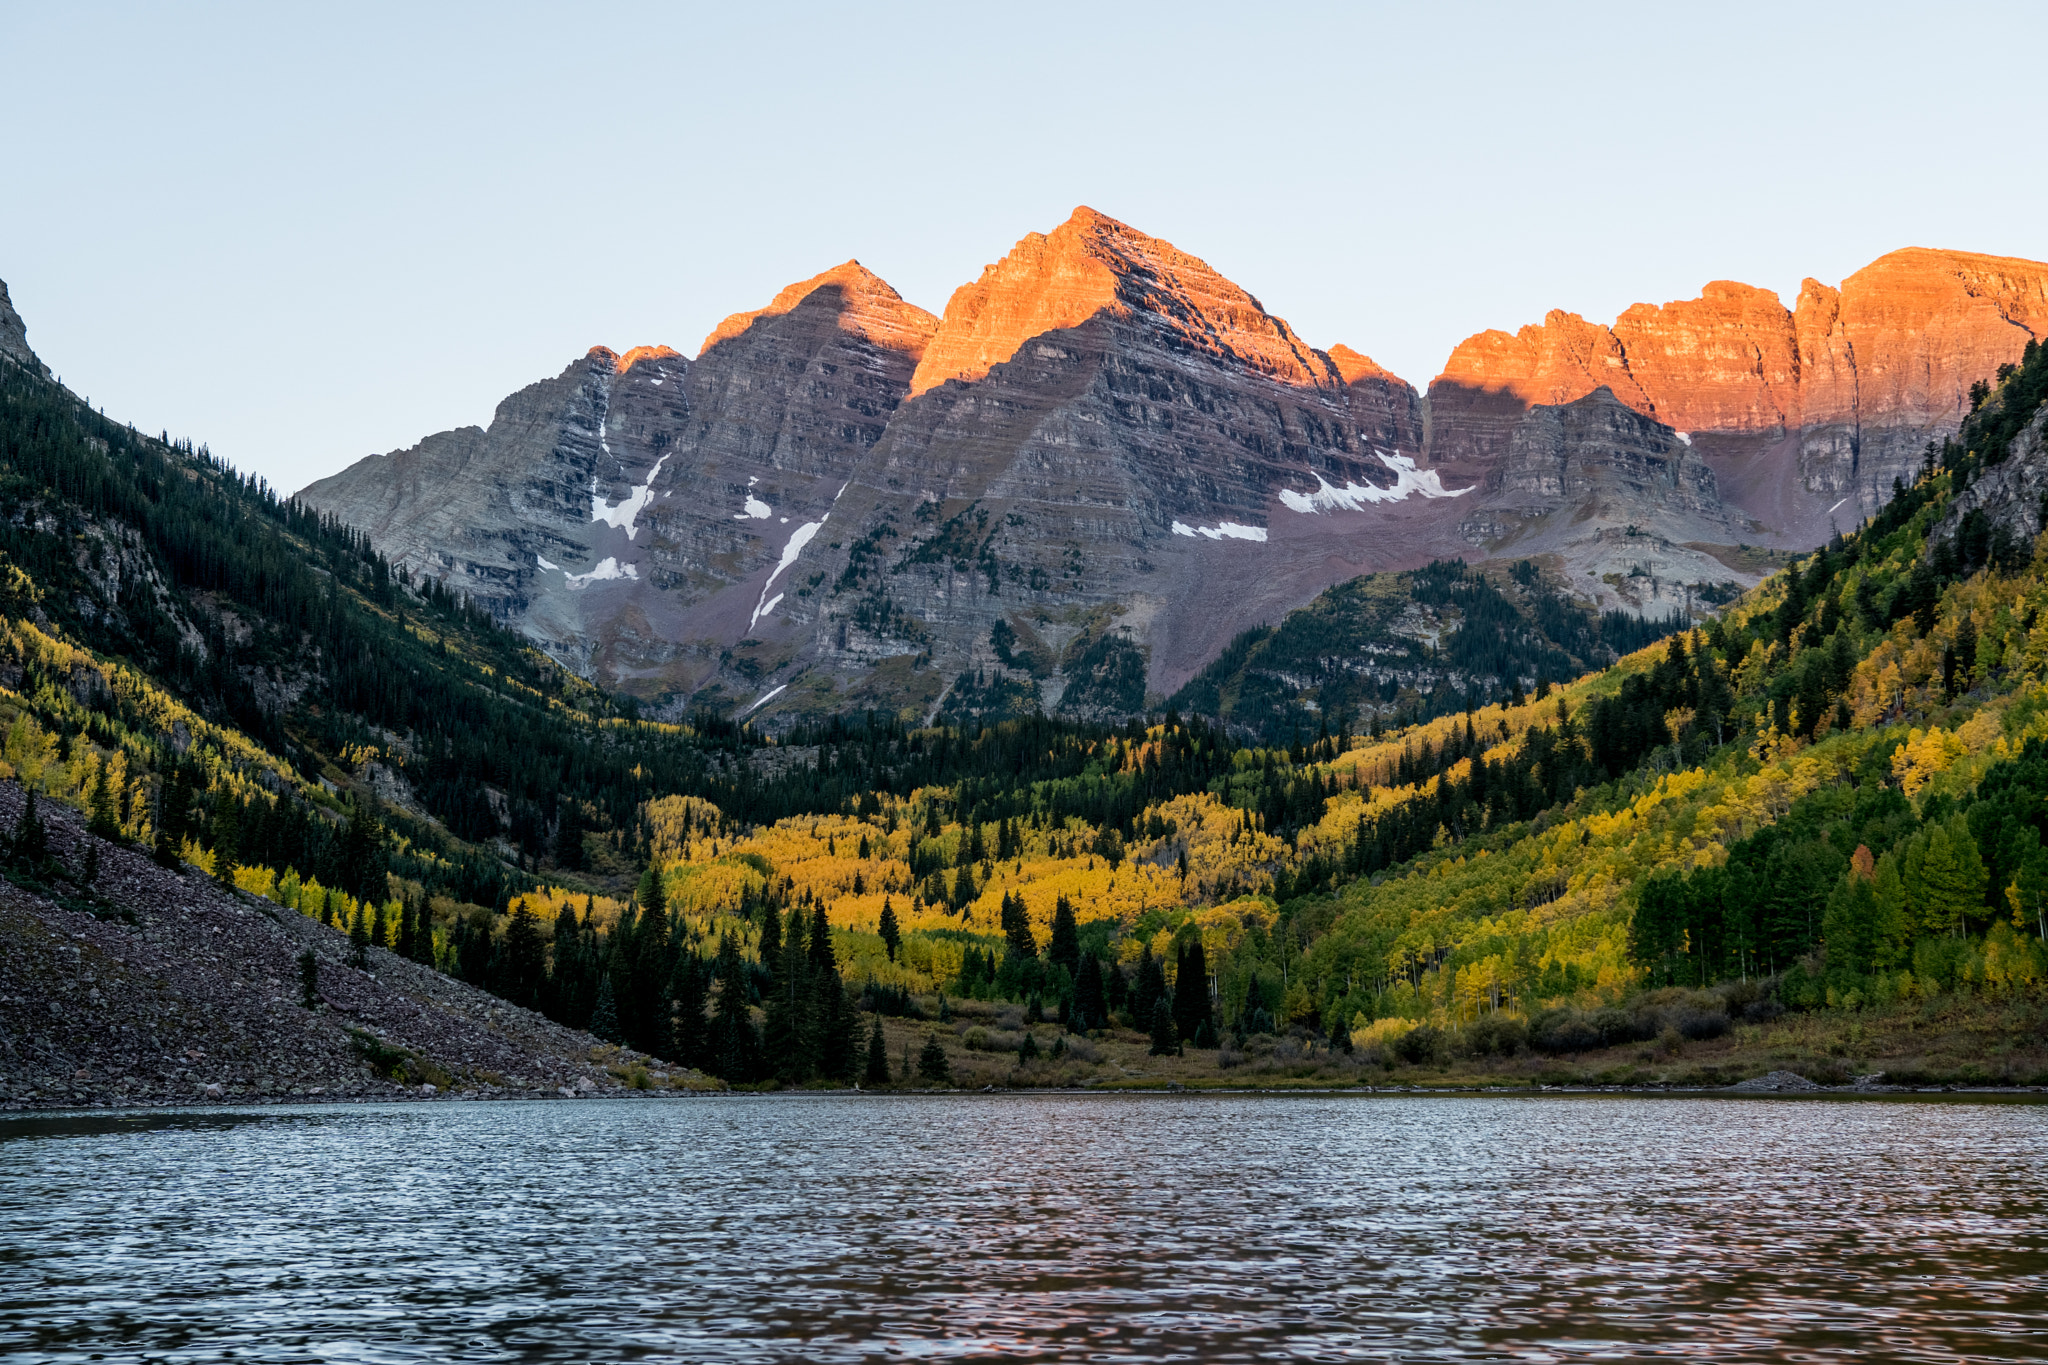 Sony a6300 sample photo. Maroon bells at sunrise photography